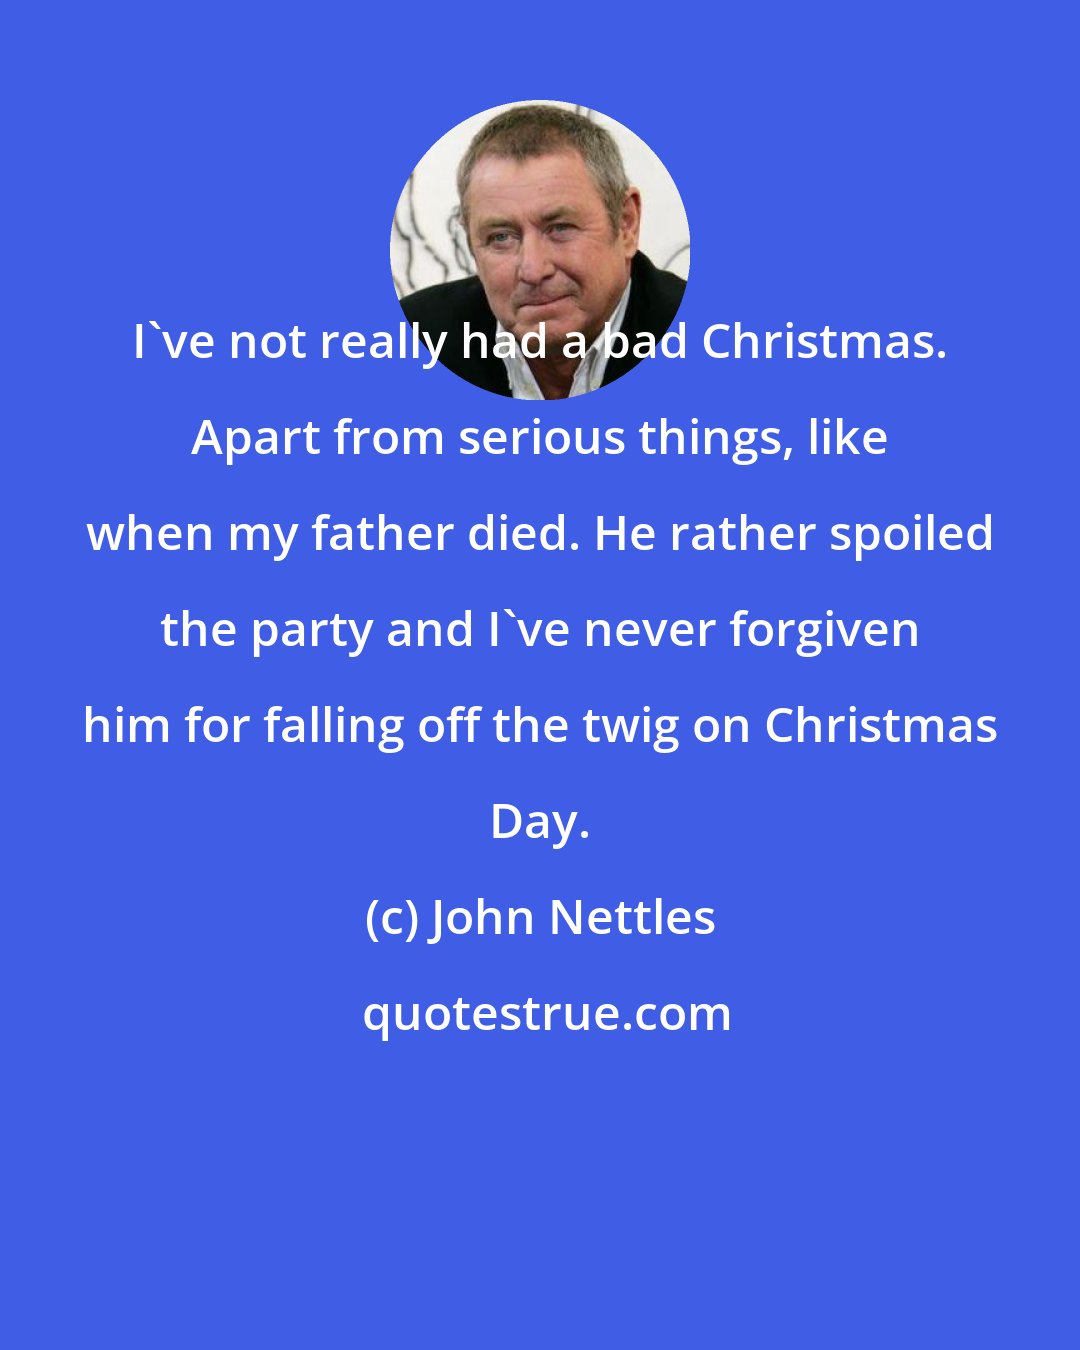 John Nettles: I've not really had a bad Christmas. Apart from serious things, like when my father died. He rather spoiled the party and I've never forgiven him for falling off the twig on Christmas Day.